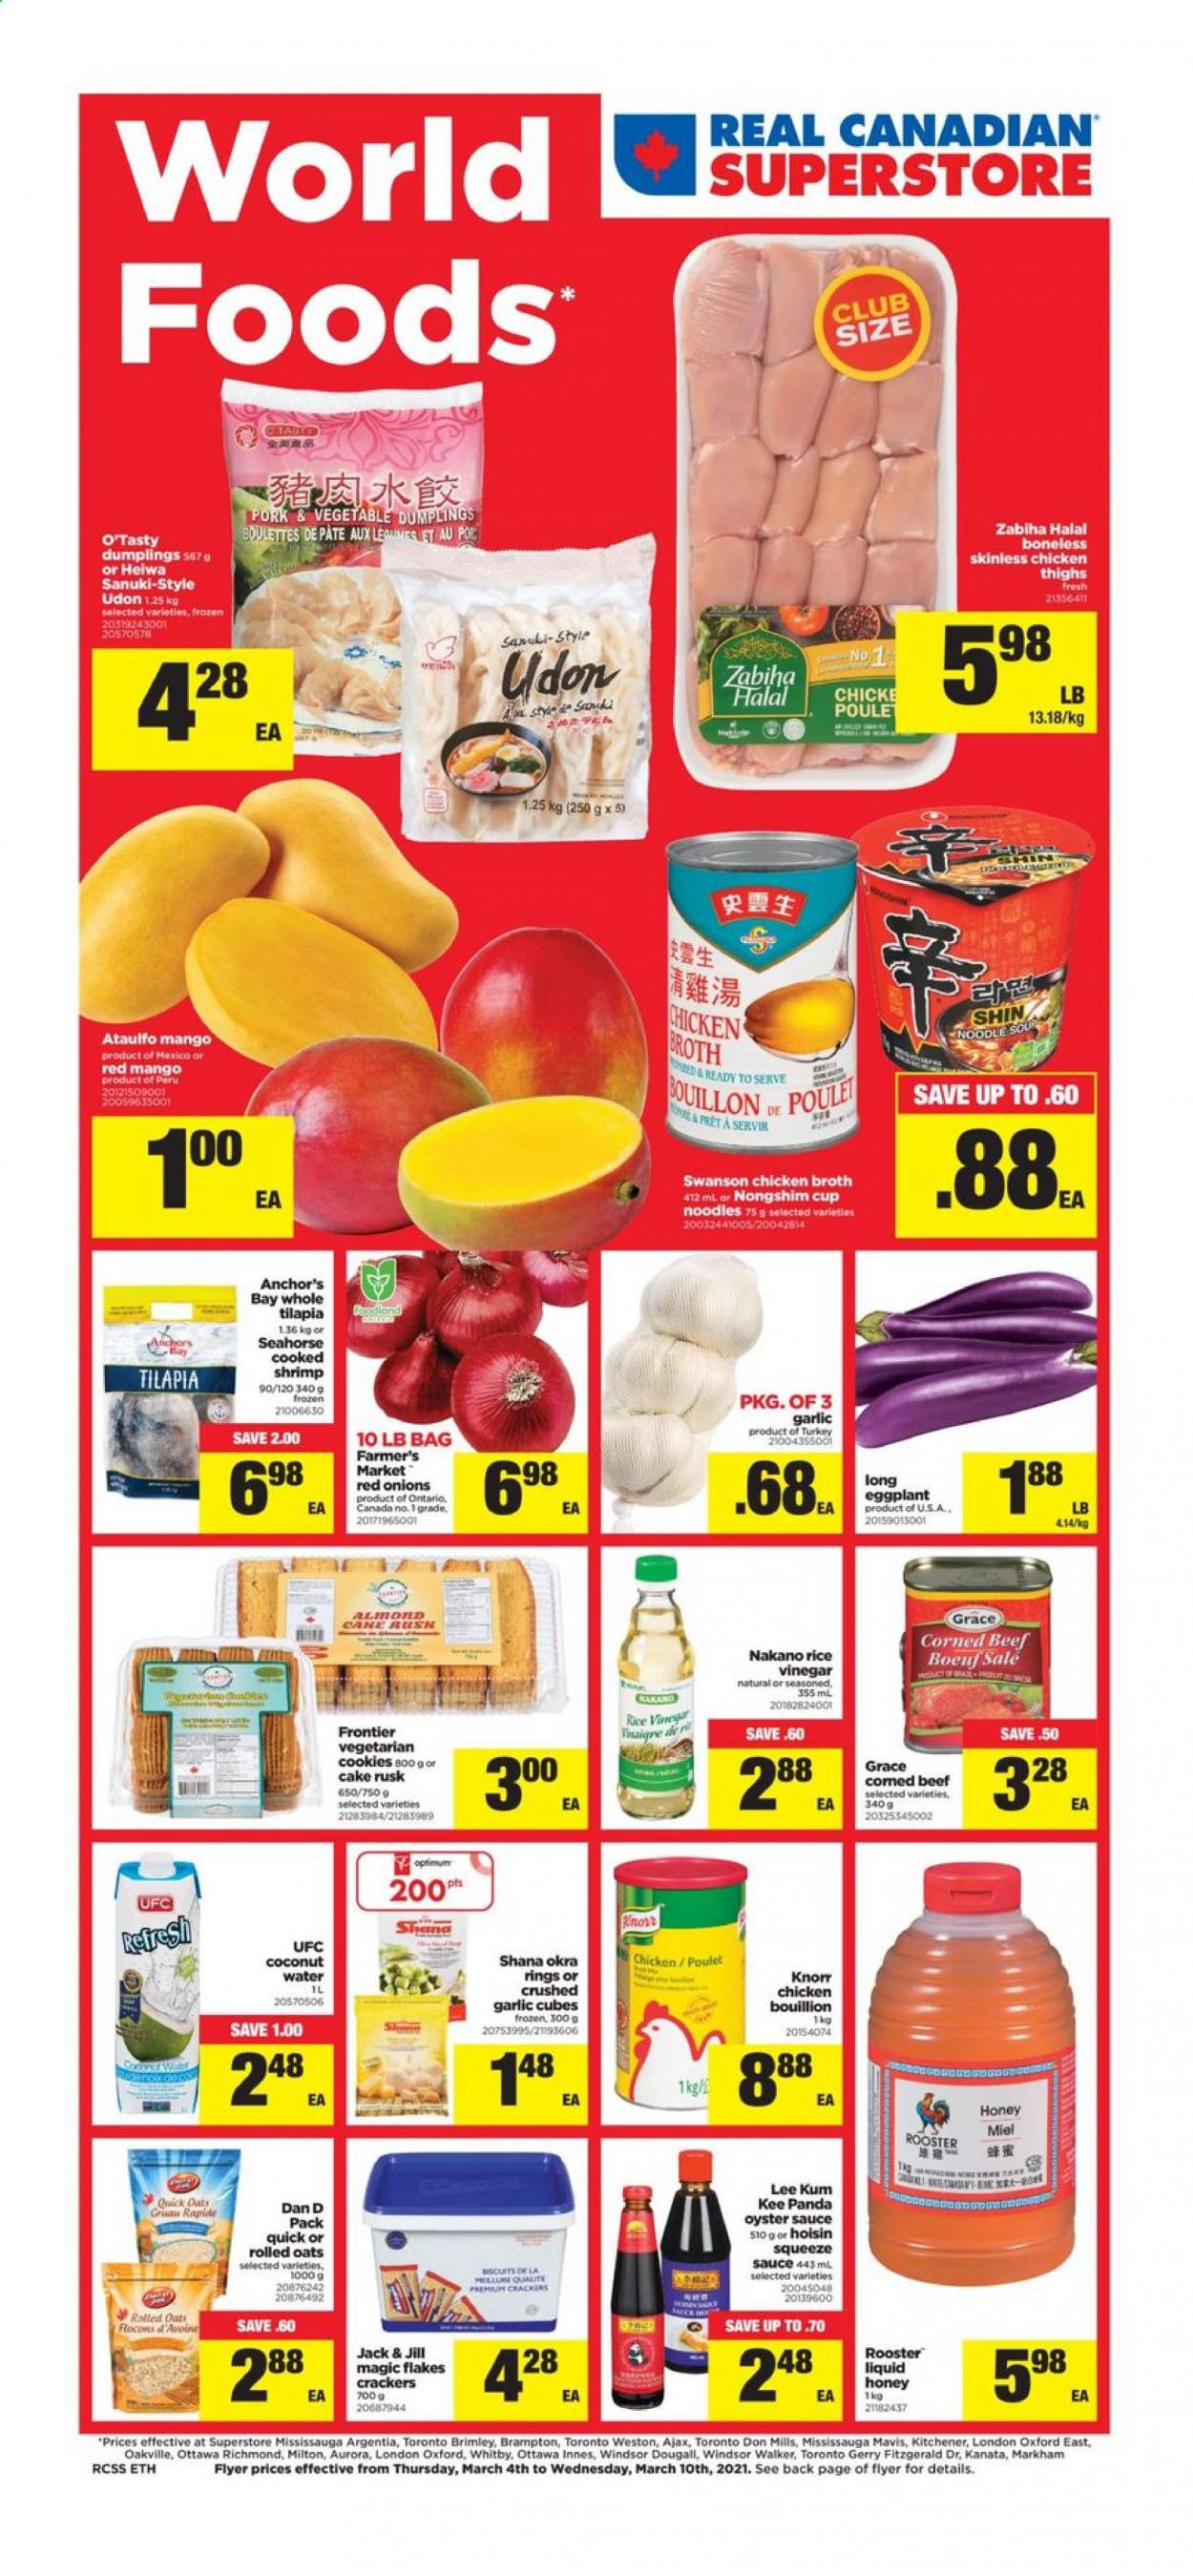 thumbnail - Circulaire Real Canadian Superstore - 04 Mars 2021 - 10 Mars 2021 - Produits soldés - poulet, Knorr, cookies, crackers, miel, Ajax. Page 1.